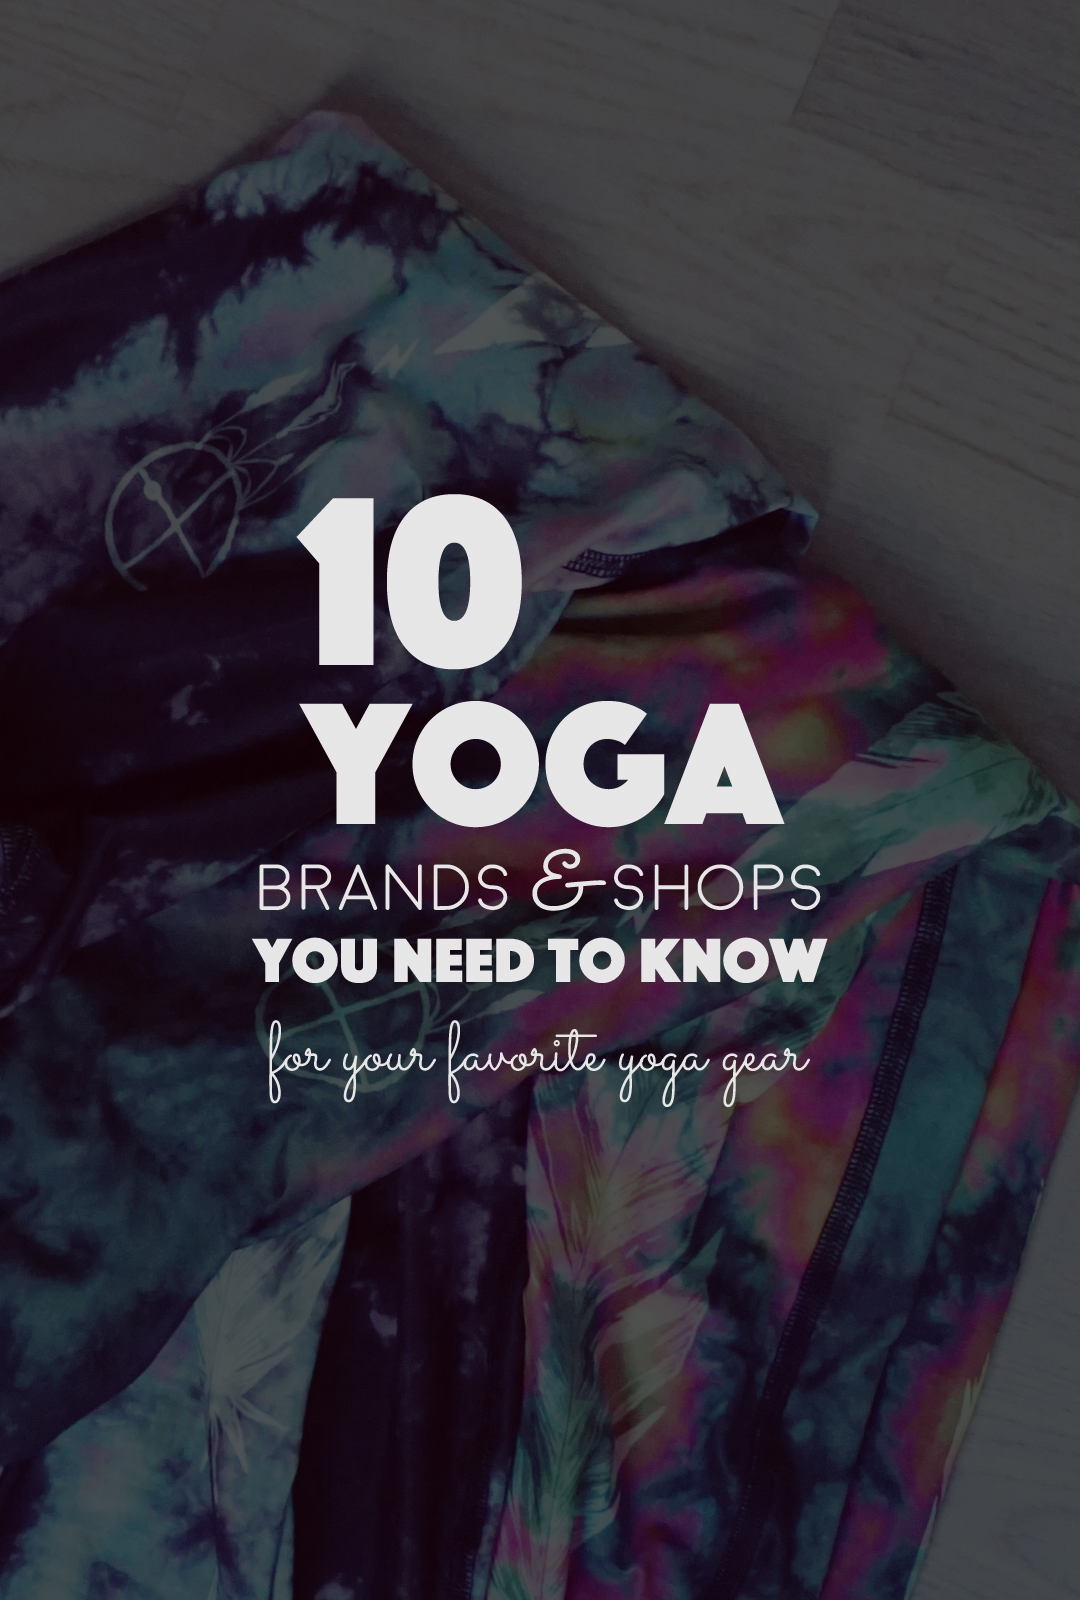 10 Yoga Brands & Shops You Need to Know | http://BananaBloom.com